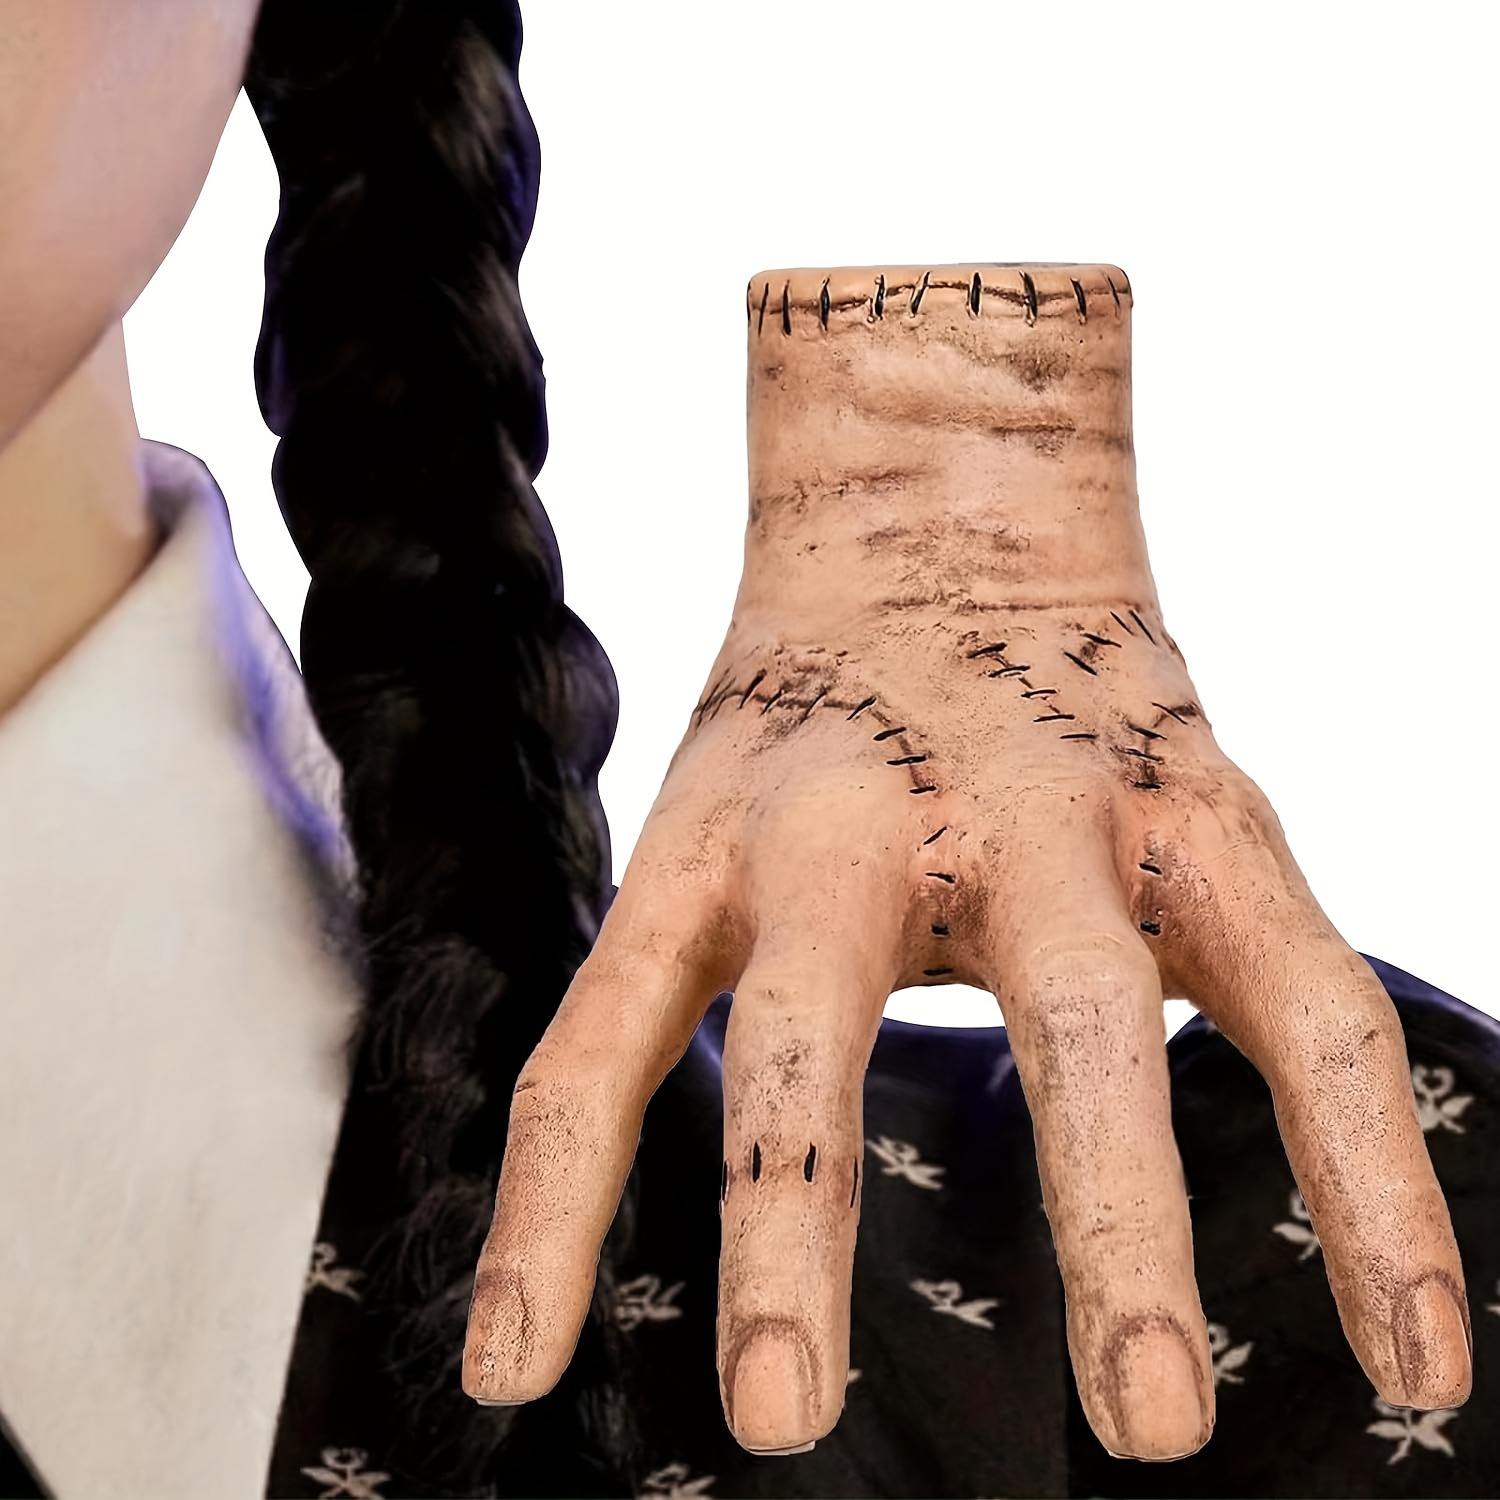 Wednesday Thing Hand Addams Hand Toy Wednesday Latex Hand Figure Horror Toy  Hand Thing Statue Home Decor Desktop Ornament